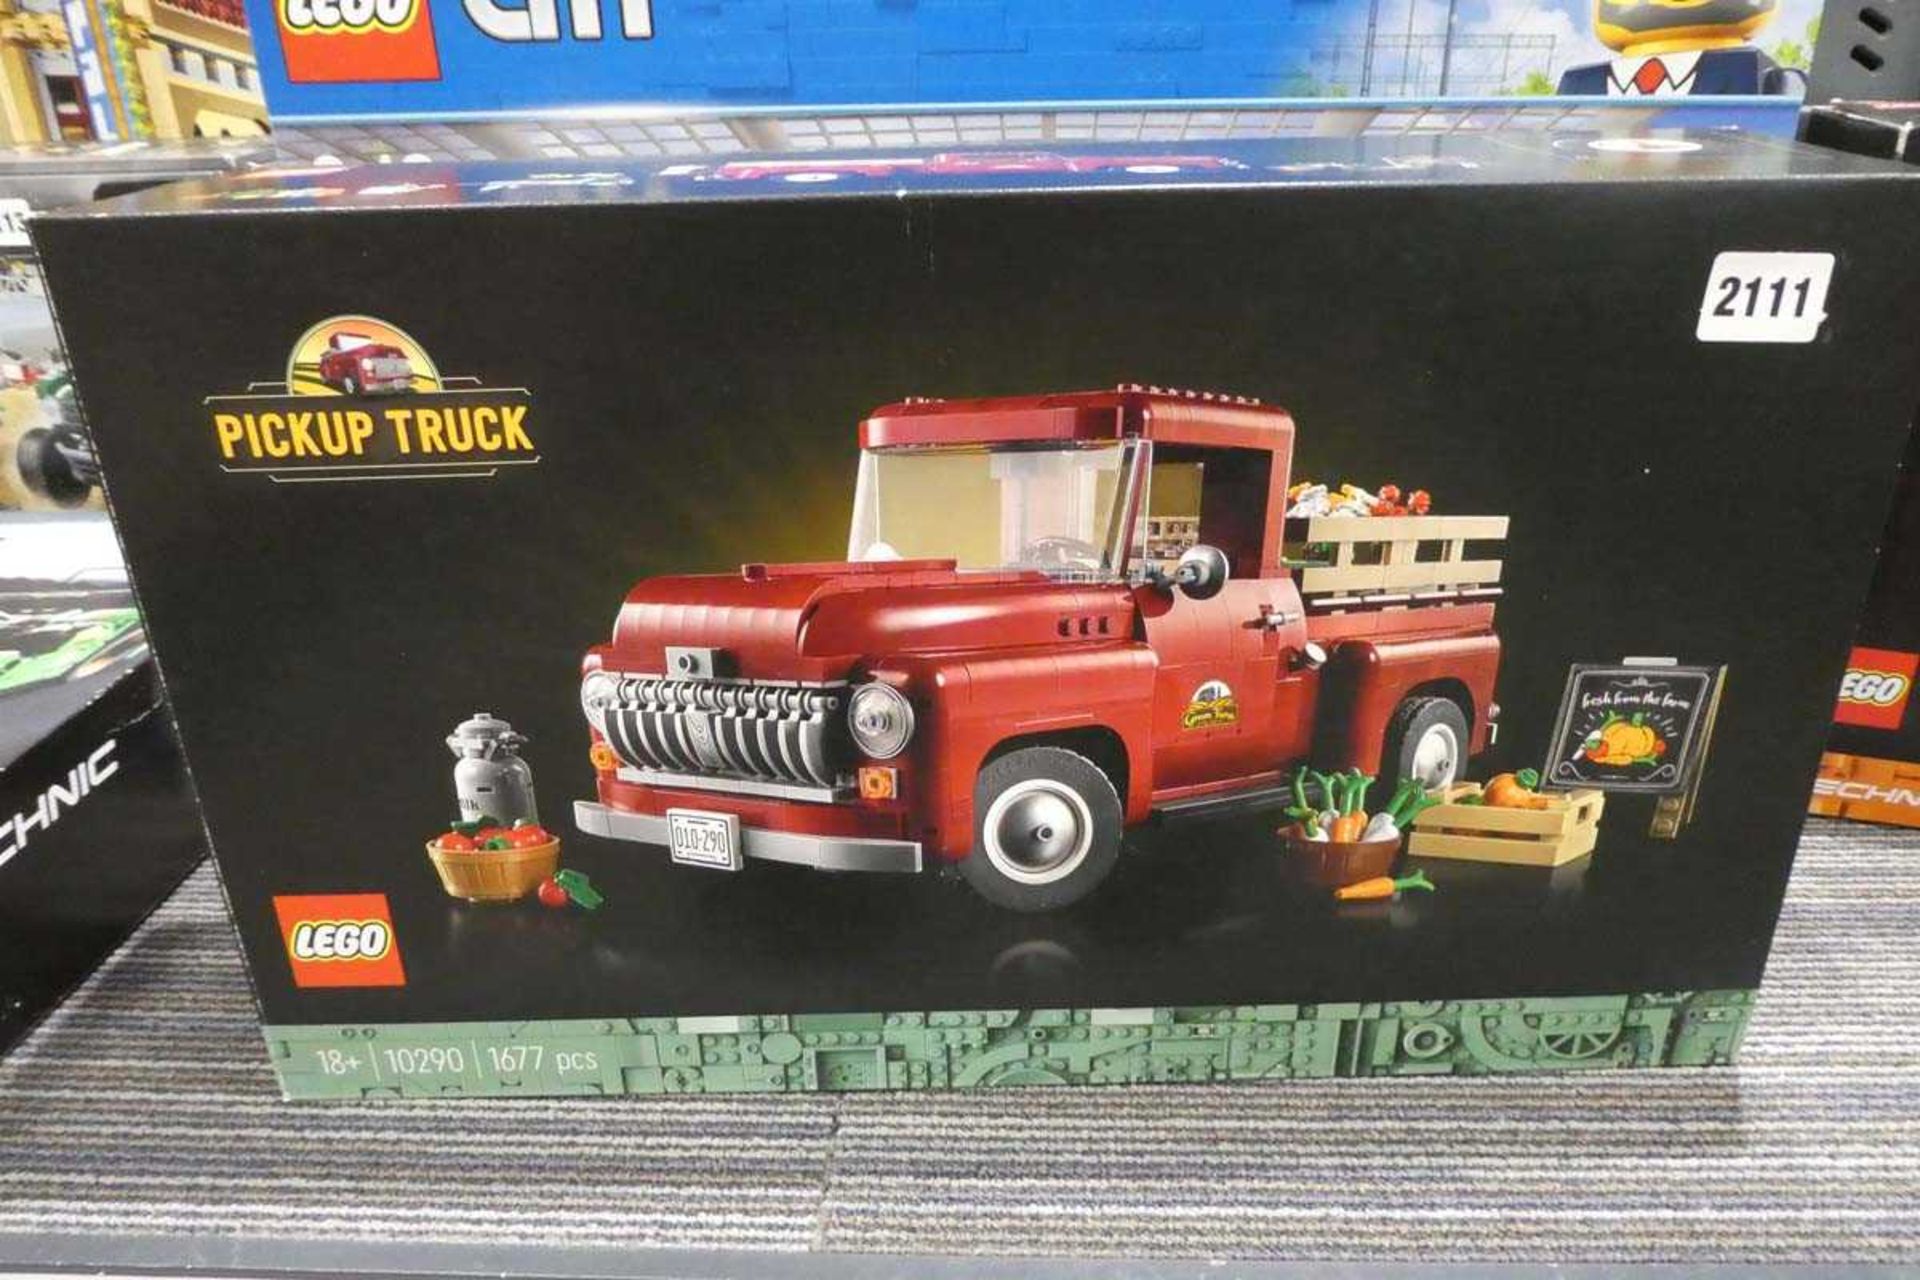 Lego Pickup Truck model 10290 (contents unchecked)